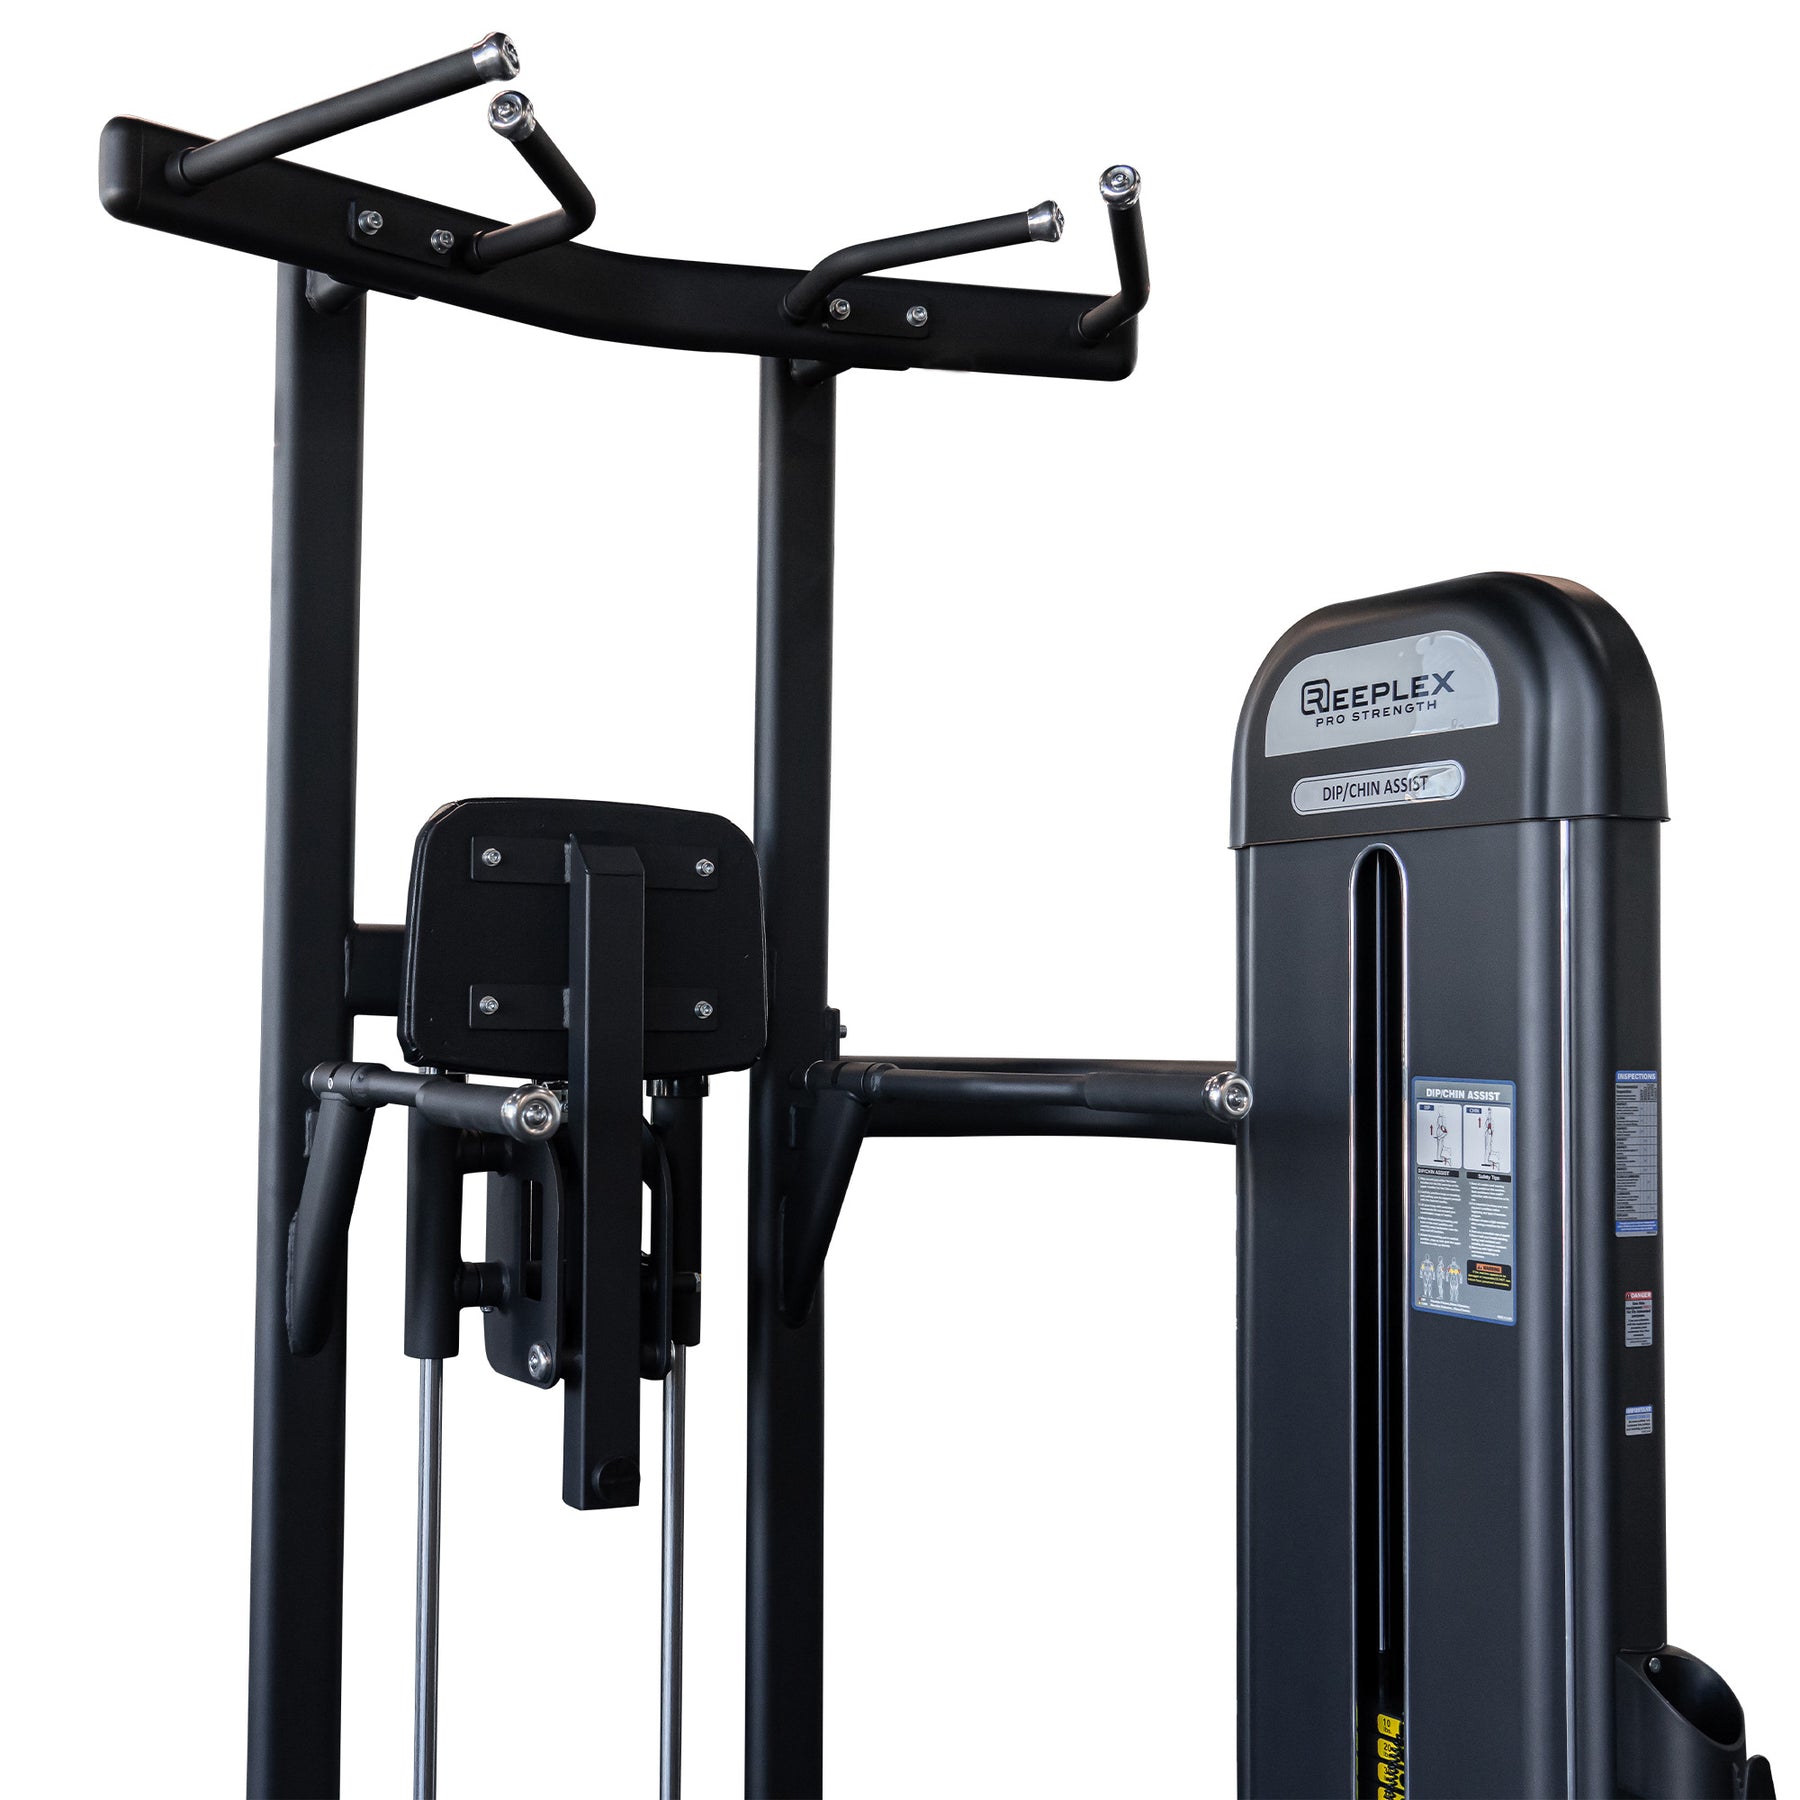 Reeplex Commercial Pin Loaded Dip/Chin-Up Assist Machine